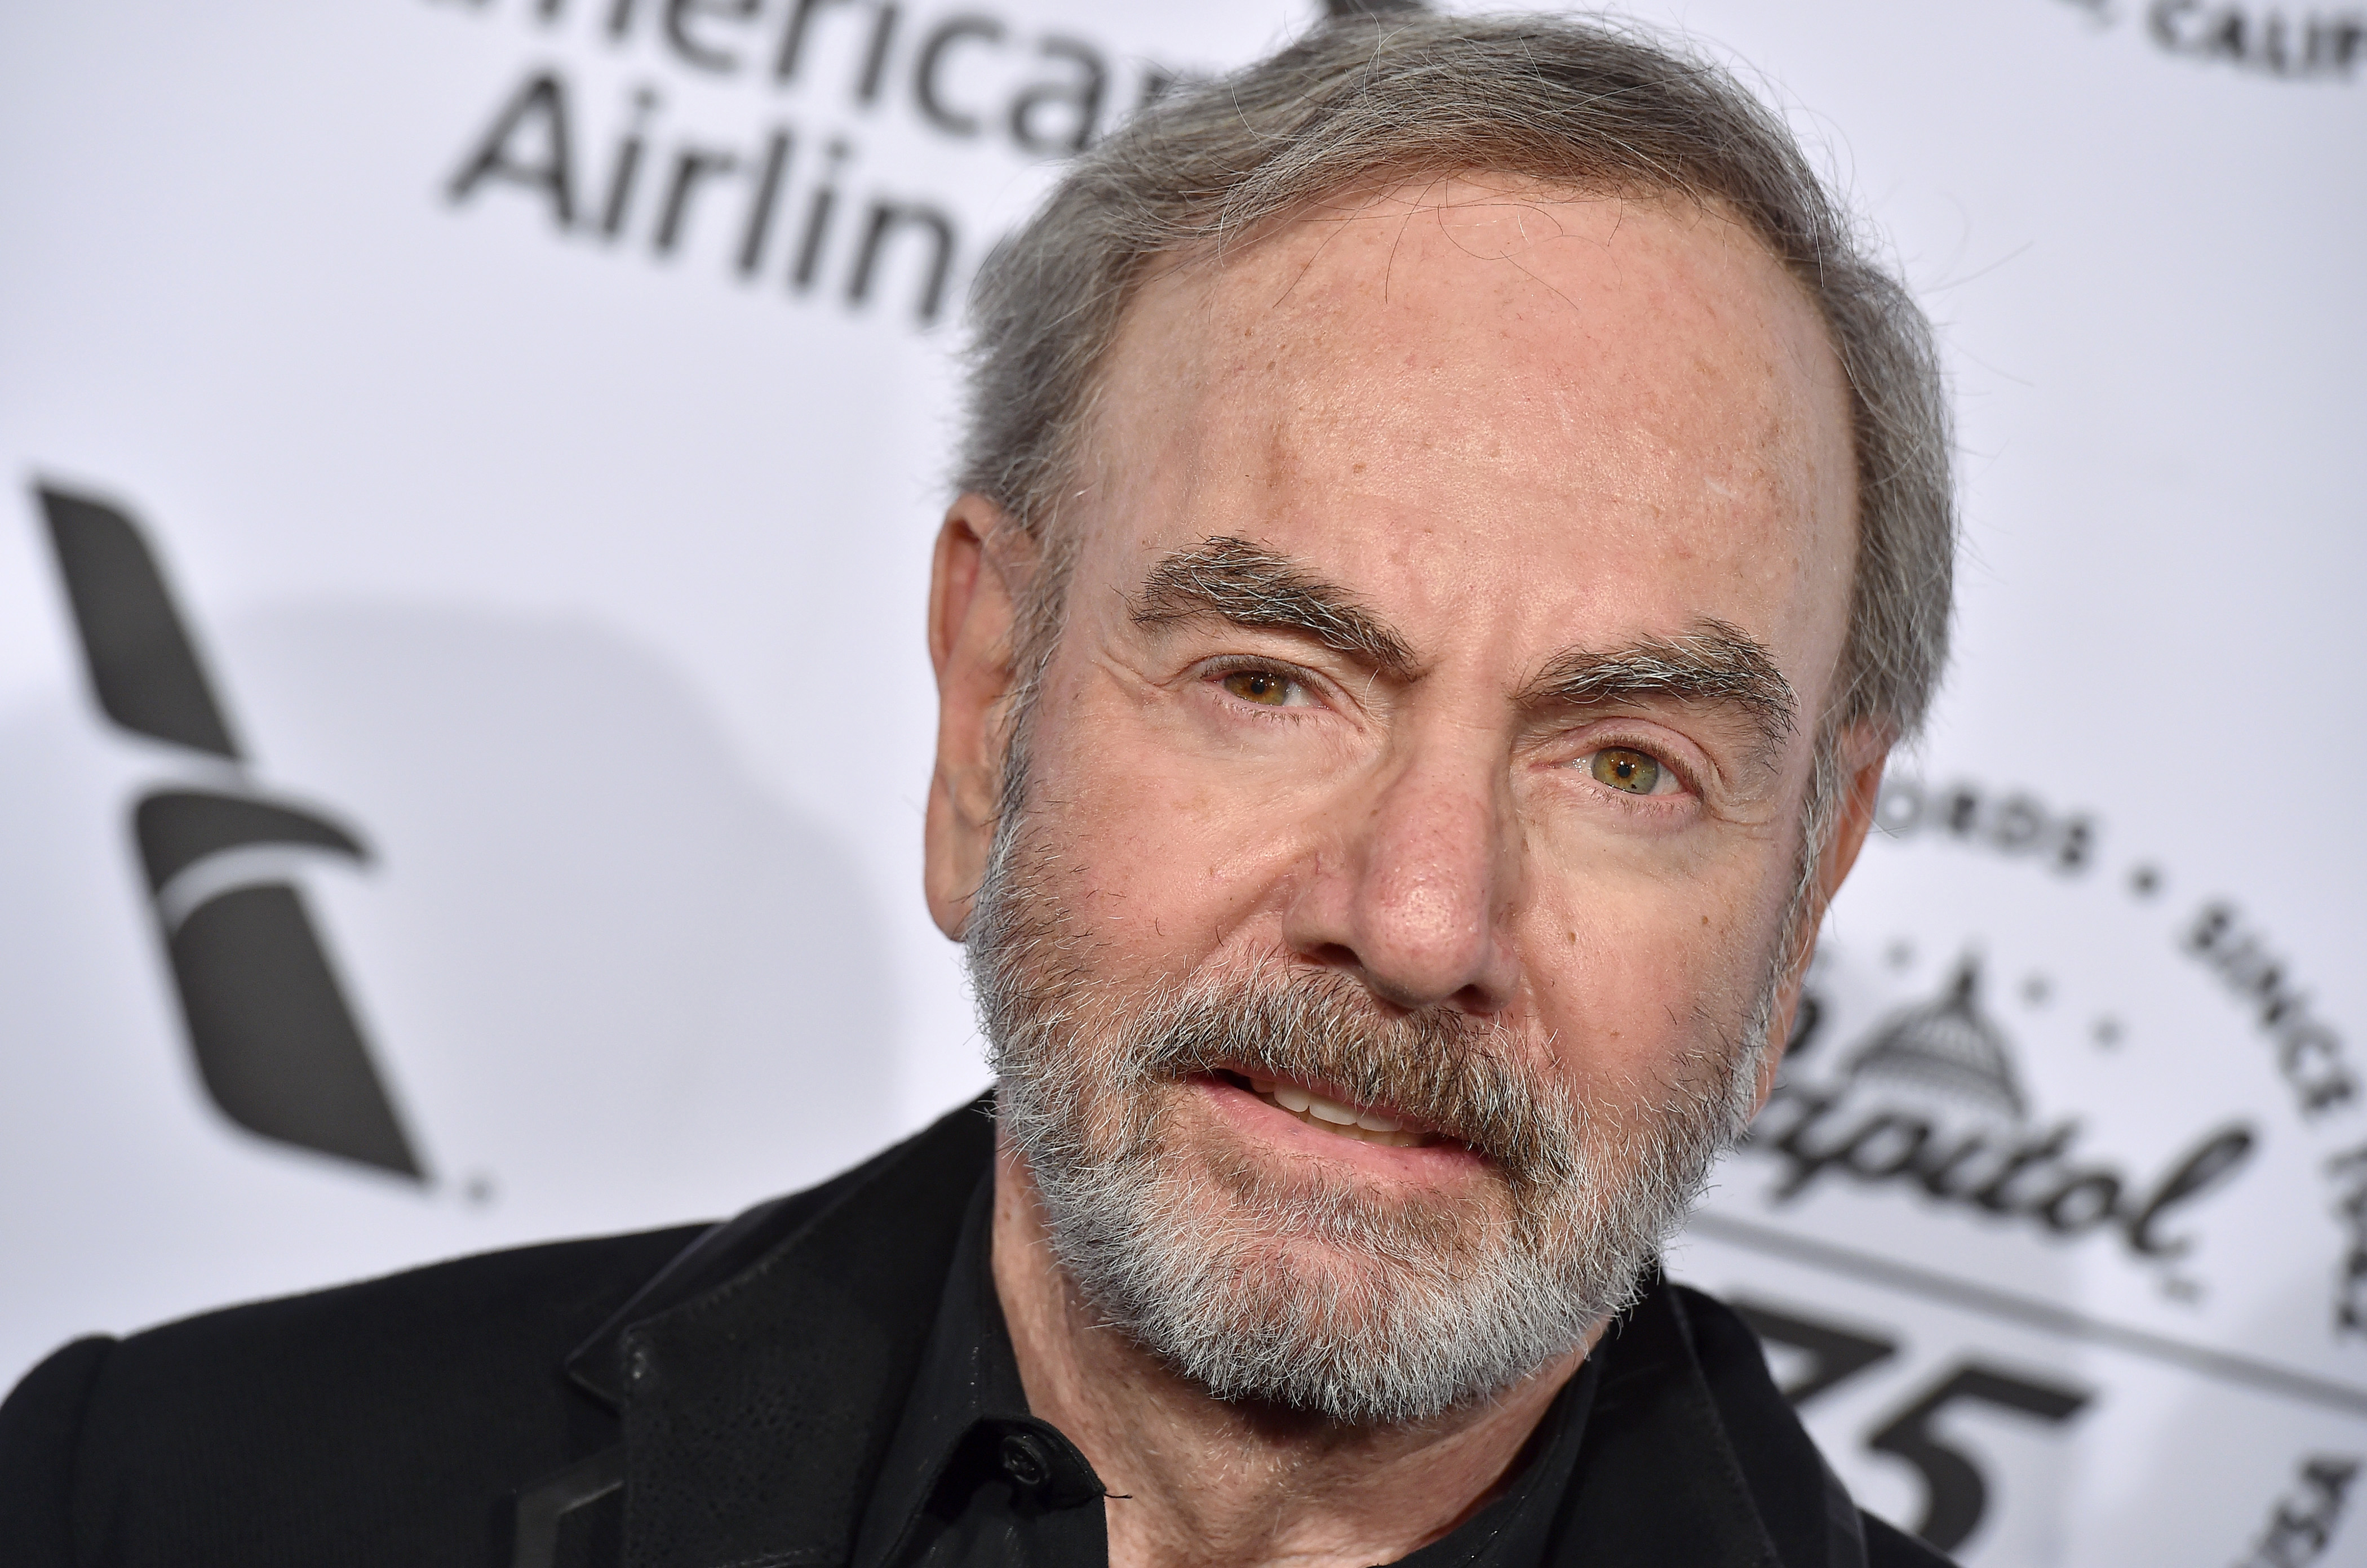 Neil Diamond Thanks Fans Donating Refunds to Parkinson's Research